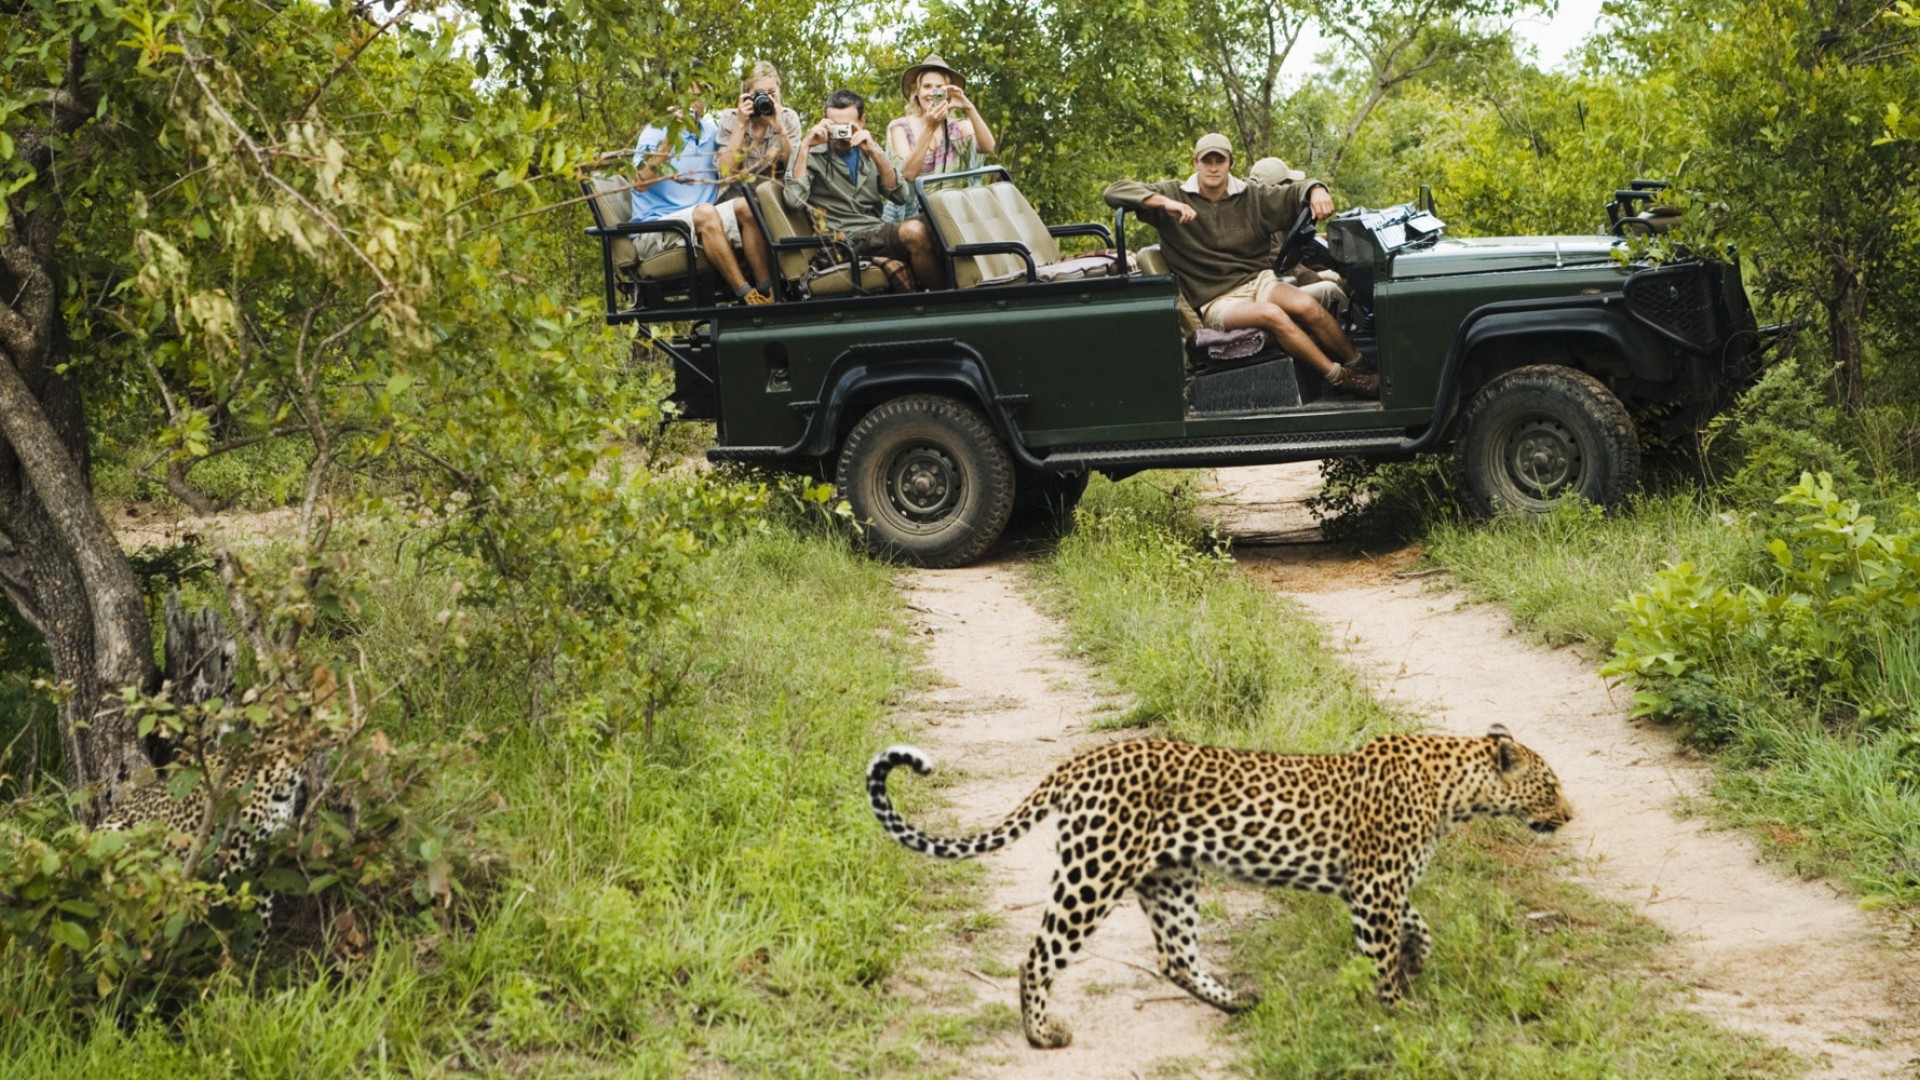 Group of people in a safari jeep watch as a cheetah walks past